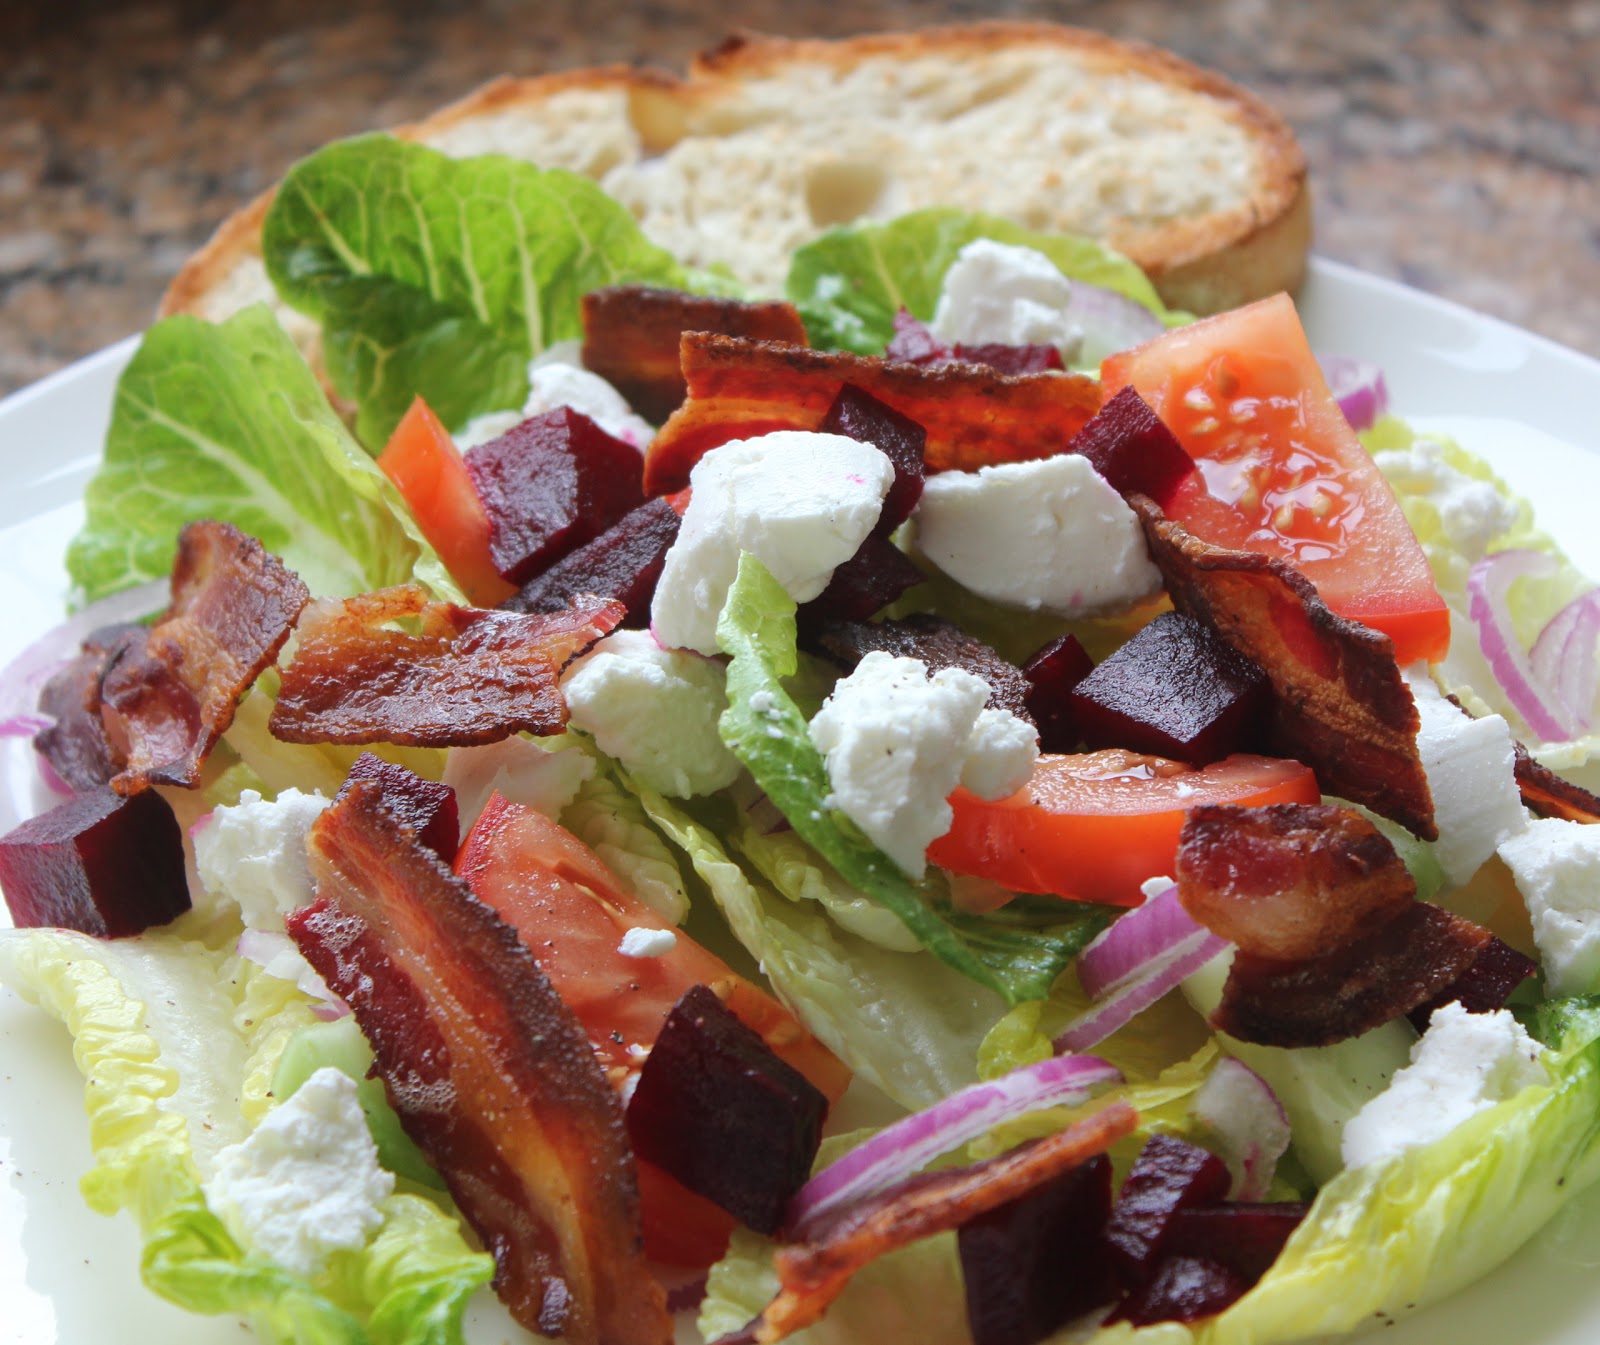 GOAT'S CHEESE SALAD WITH BACON AND BEETROOT